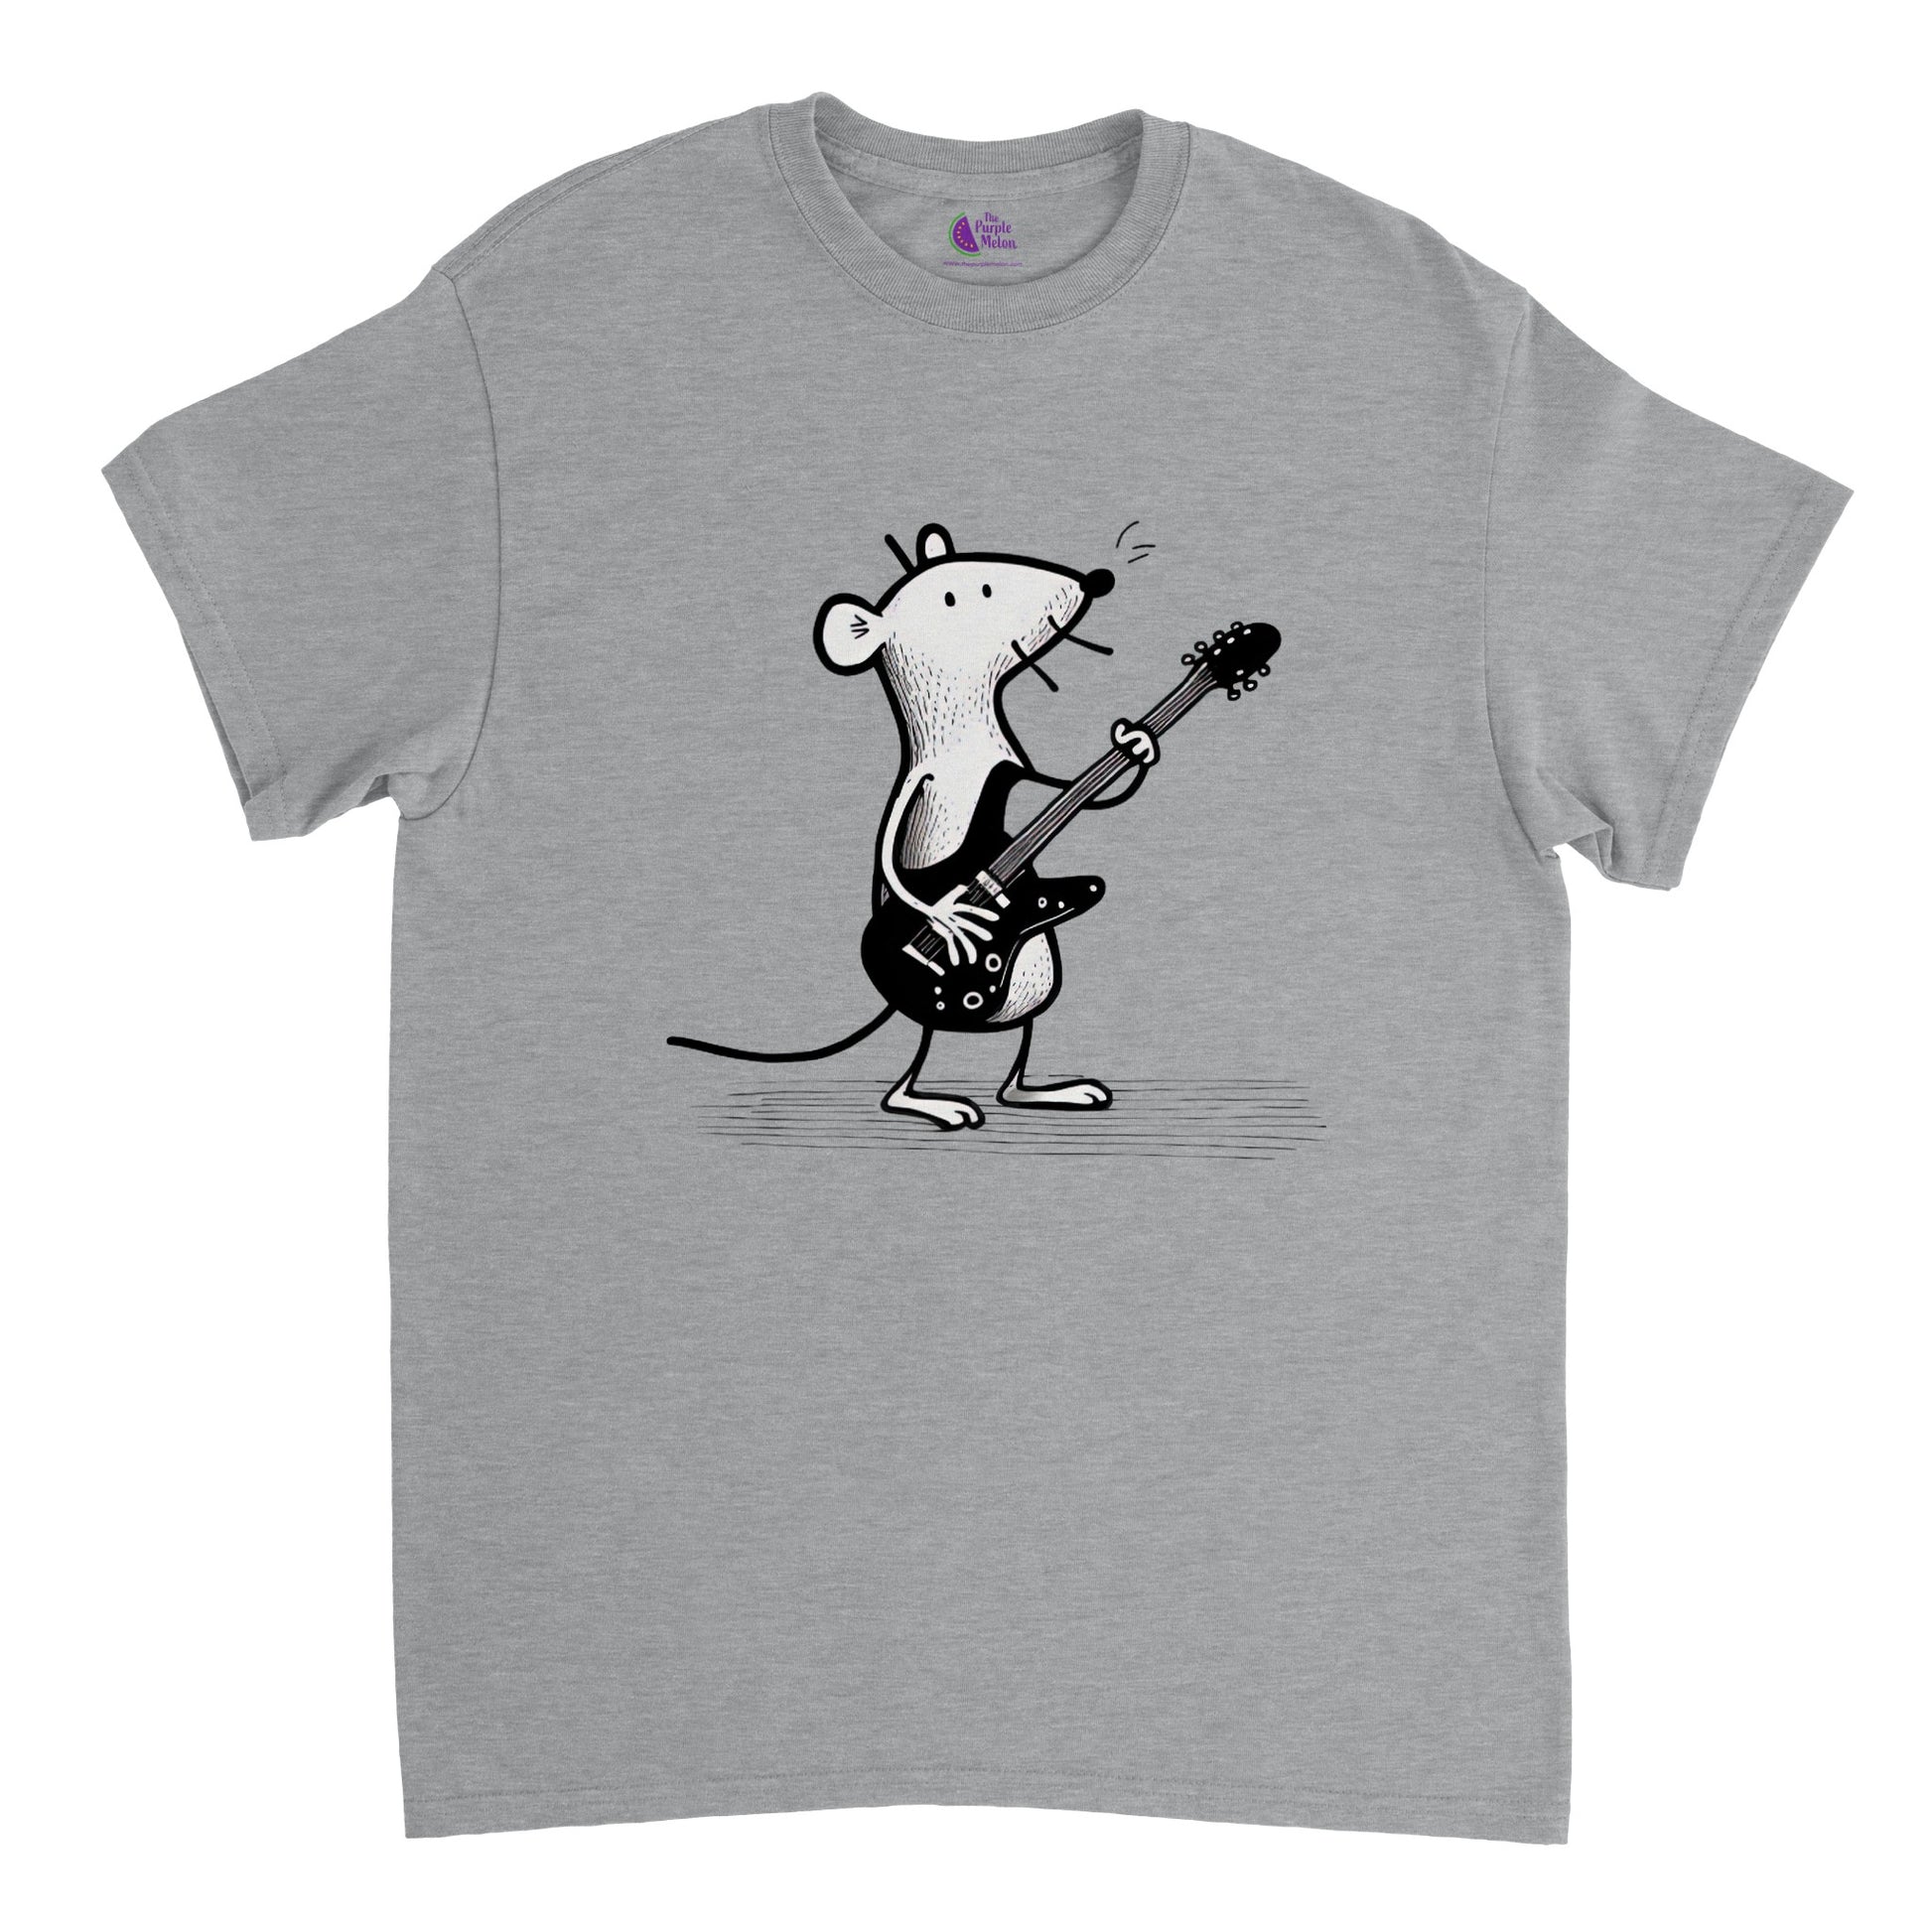 Light grey t-shirt with a mouse playing guitar print